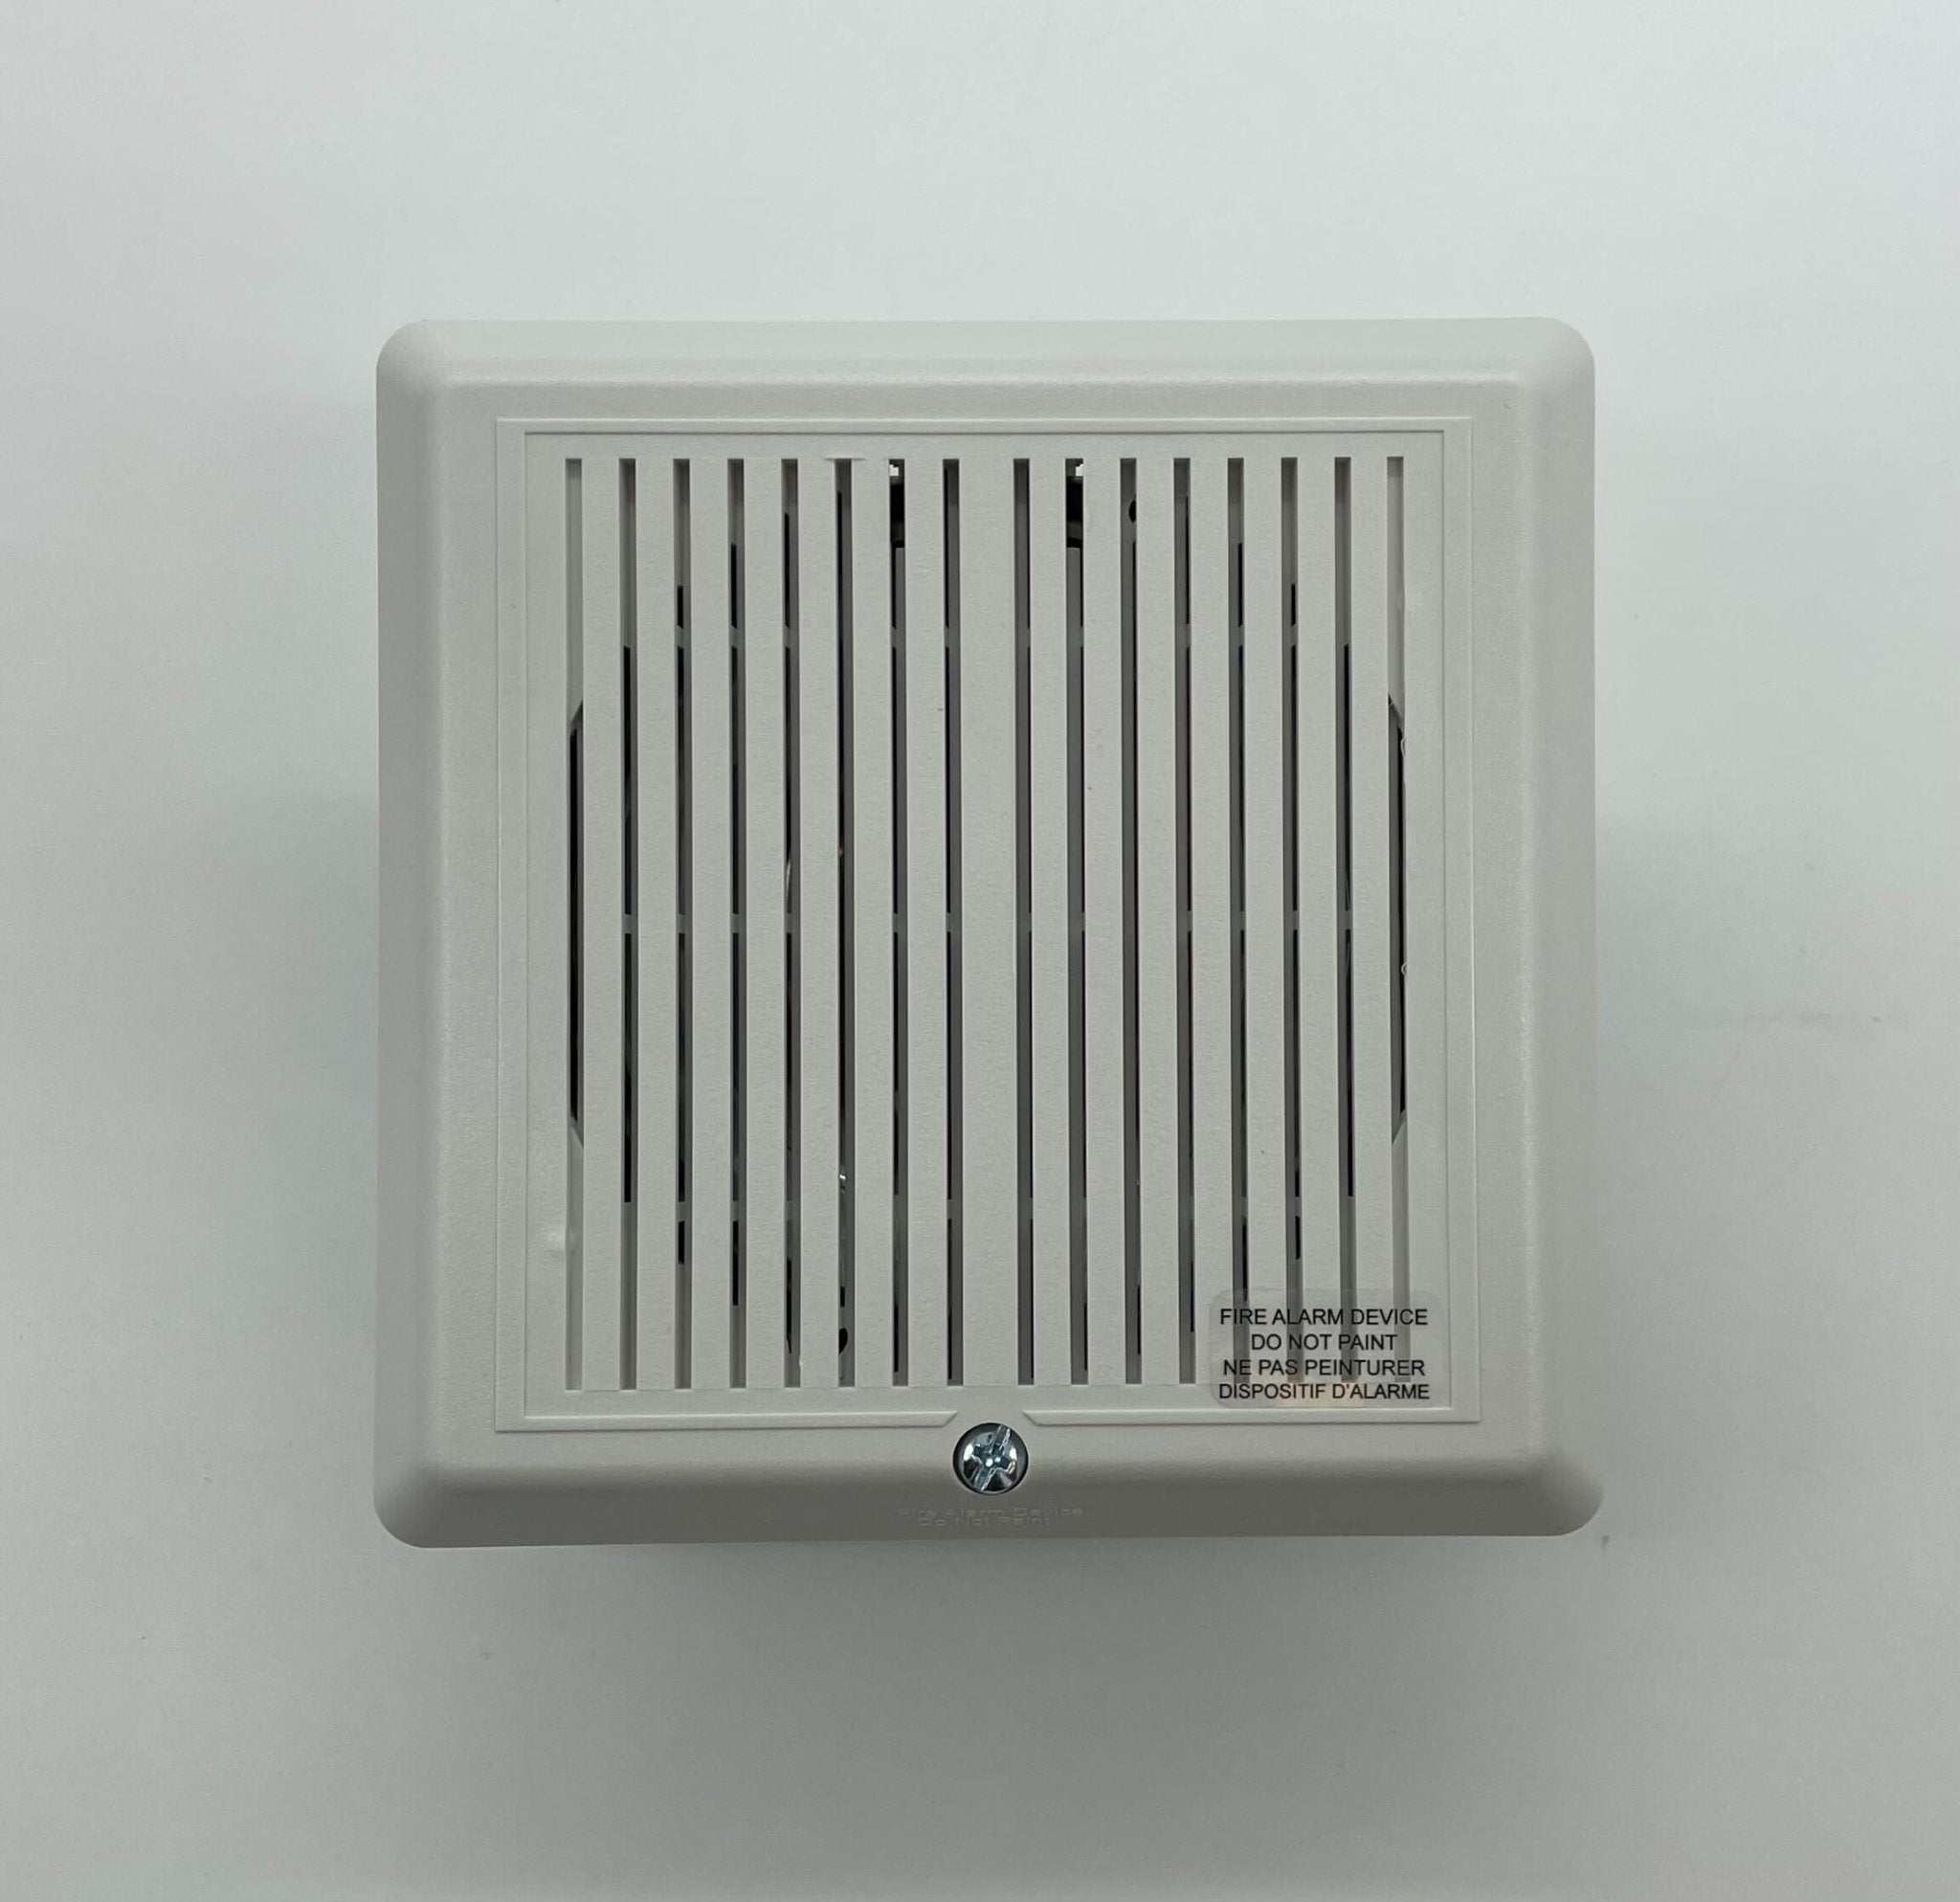 Edwards 757-1A-S70W - The Fire Alarm Supplier